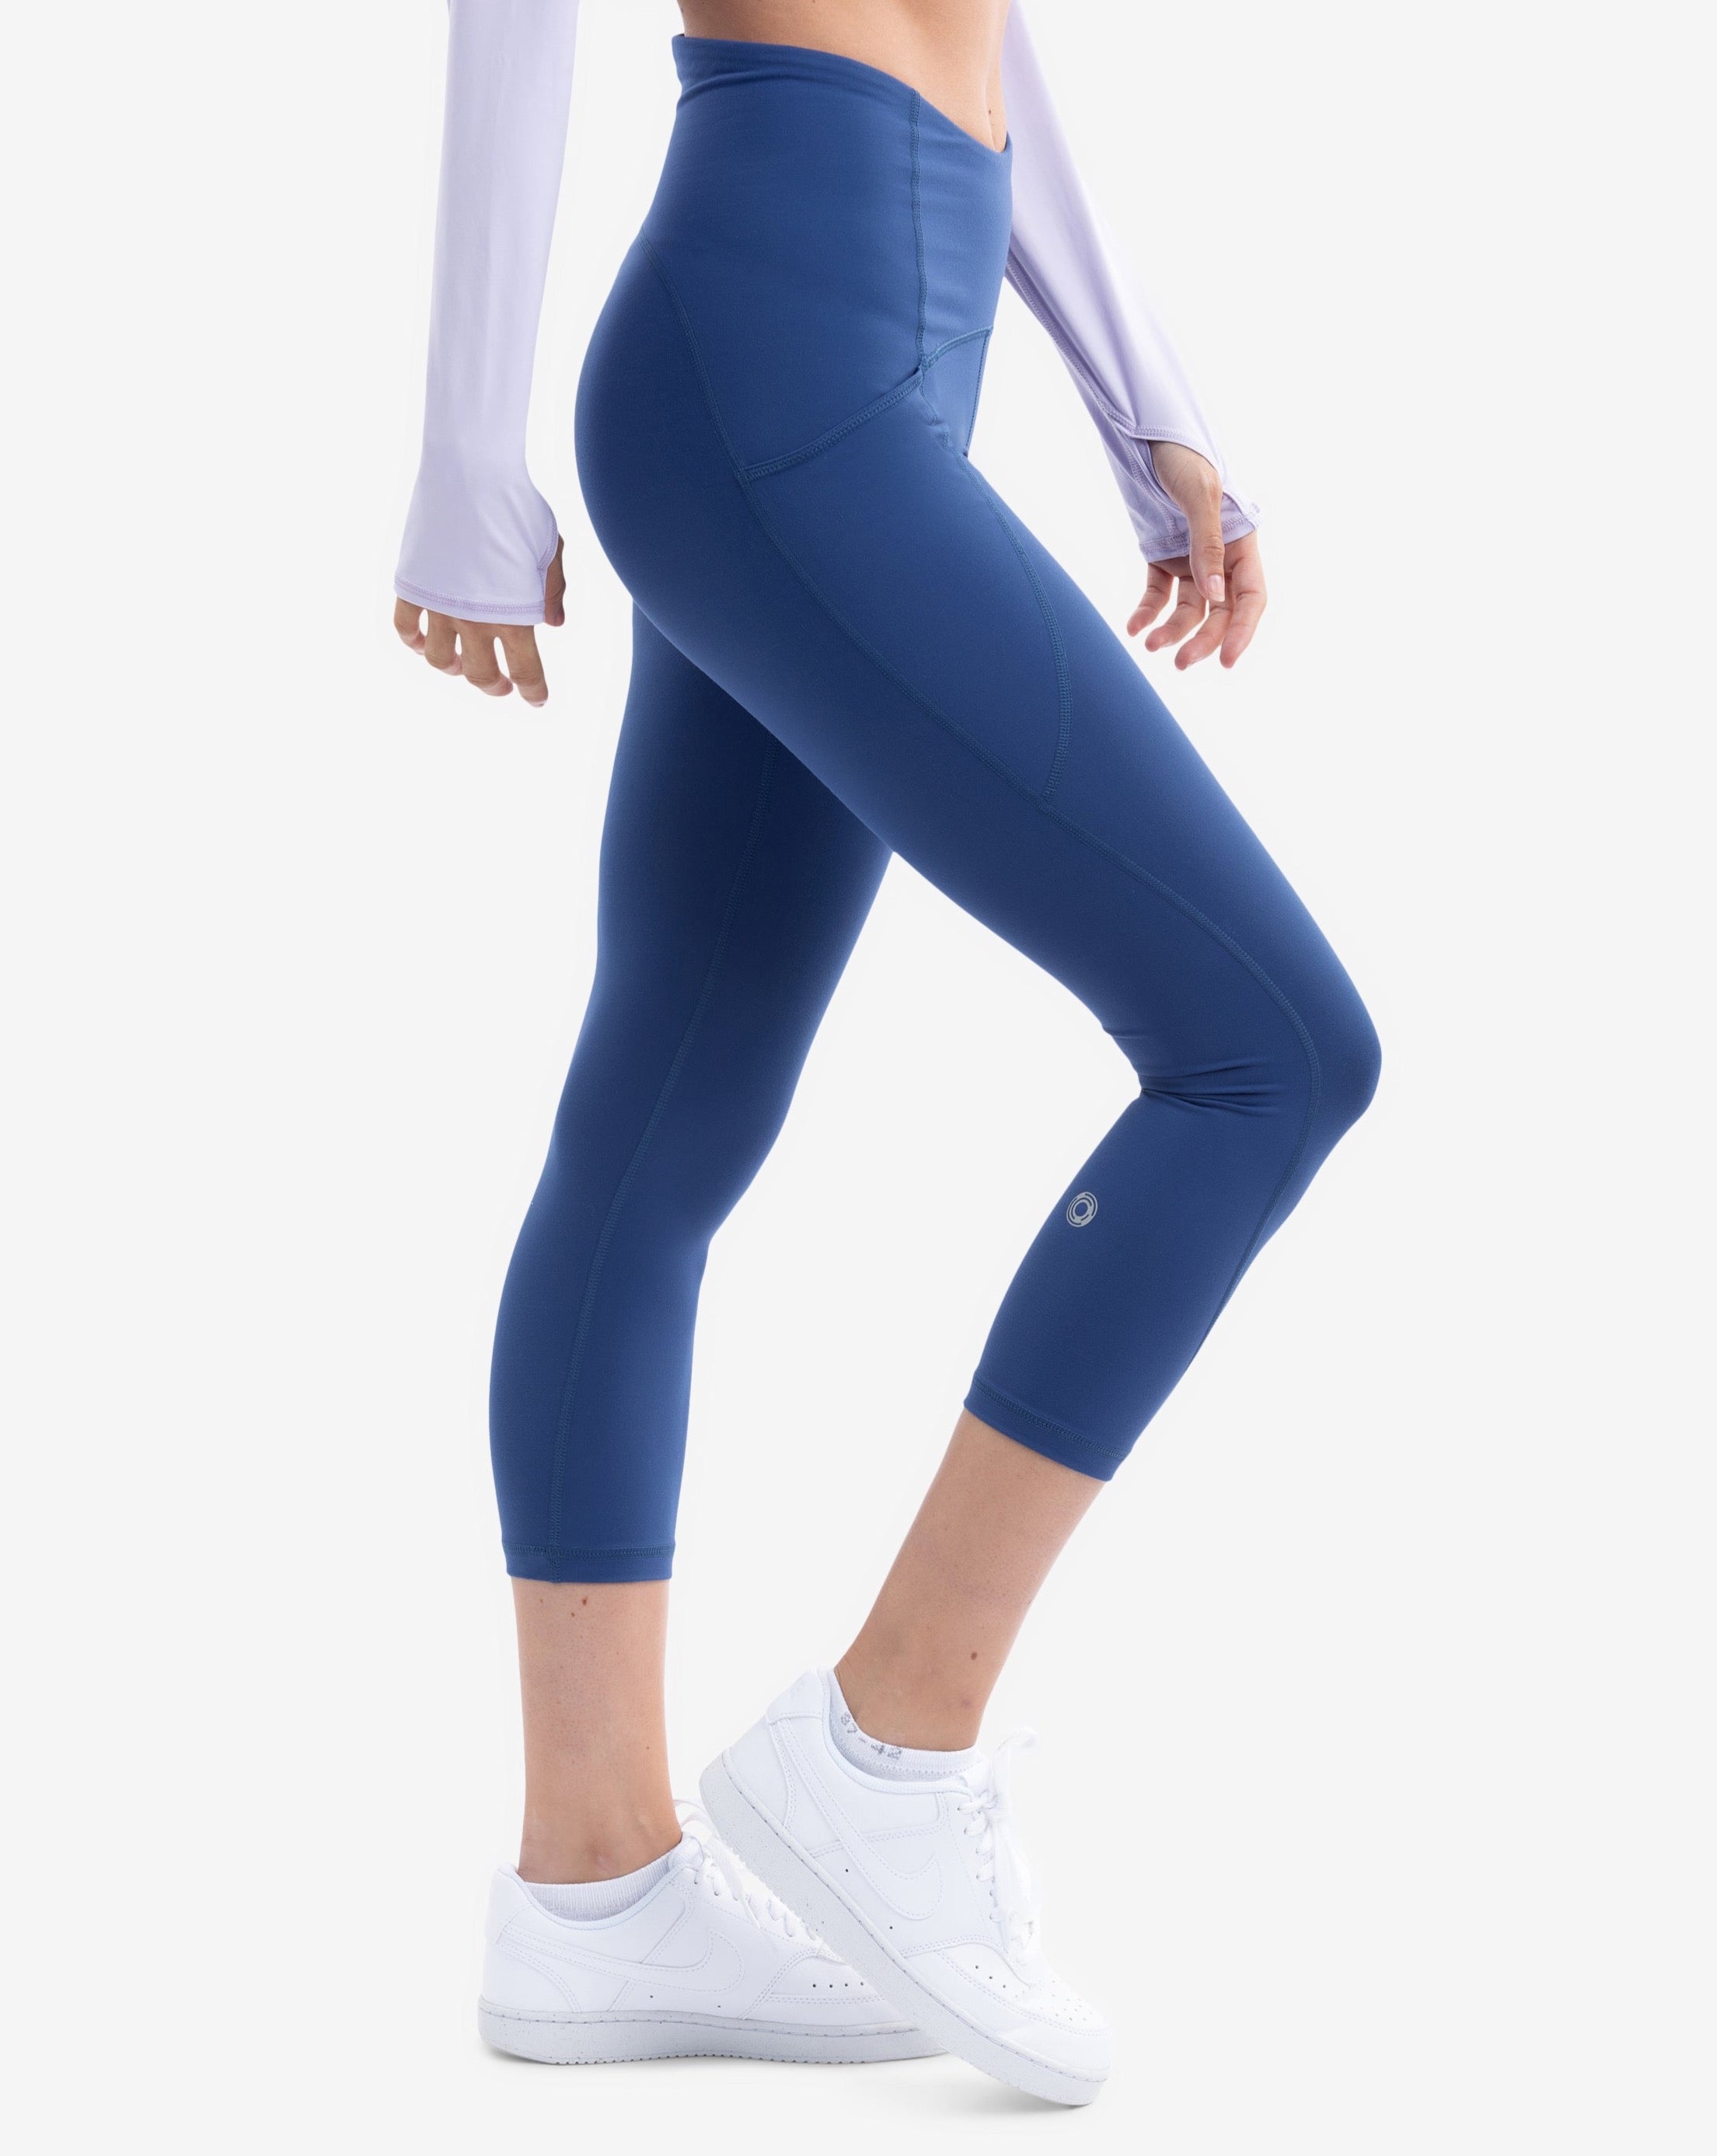 SELONE Compression Leggings Capris With Pockets High Waist Casual